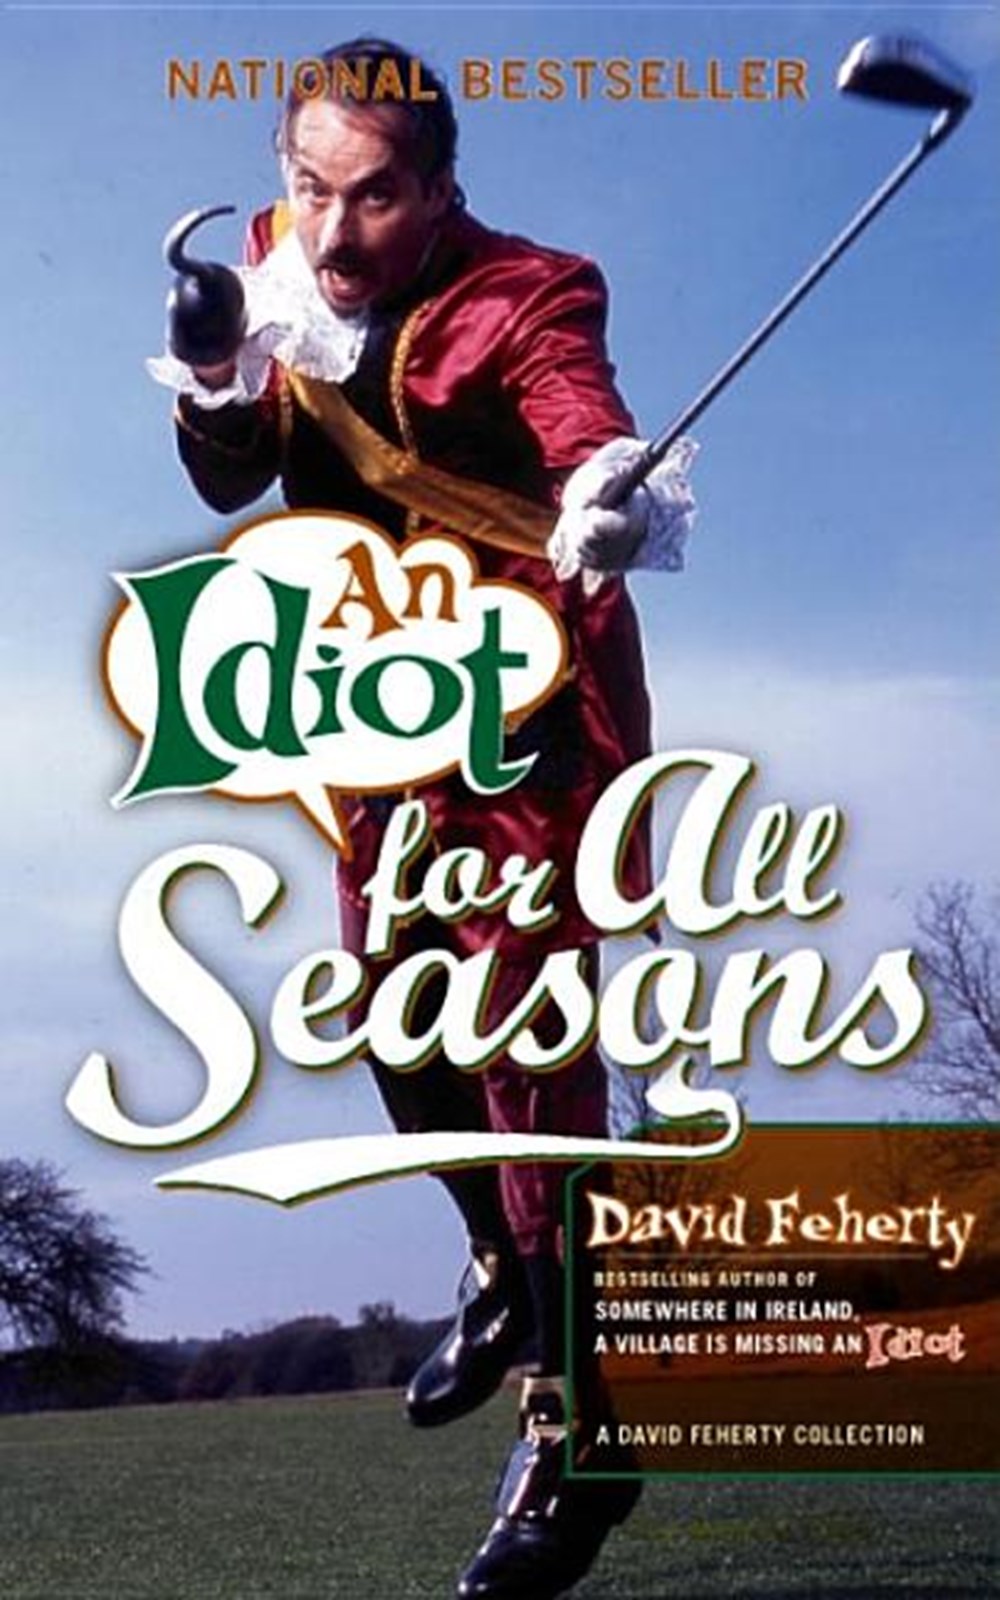 Idiot for All Seasons